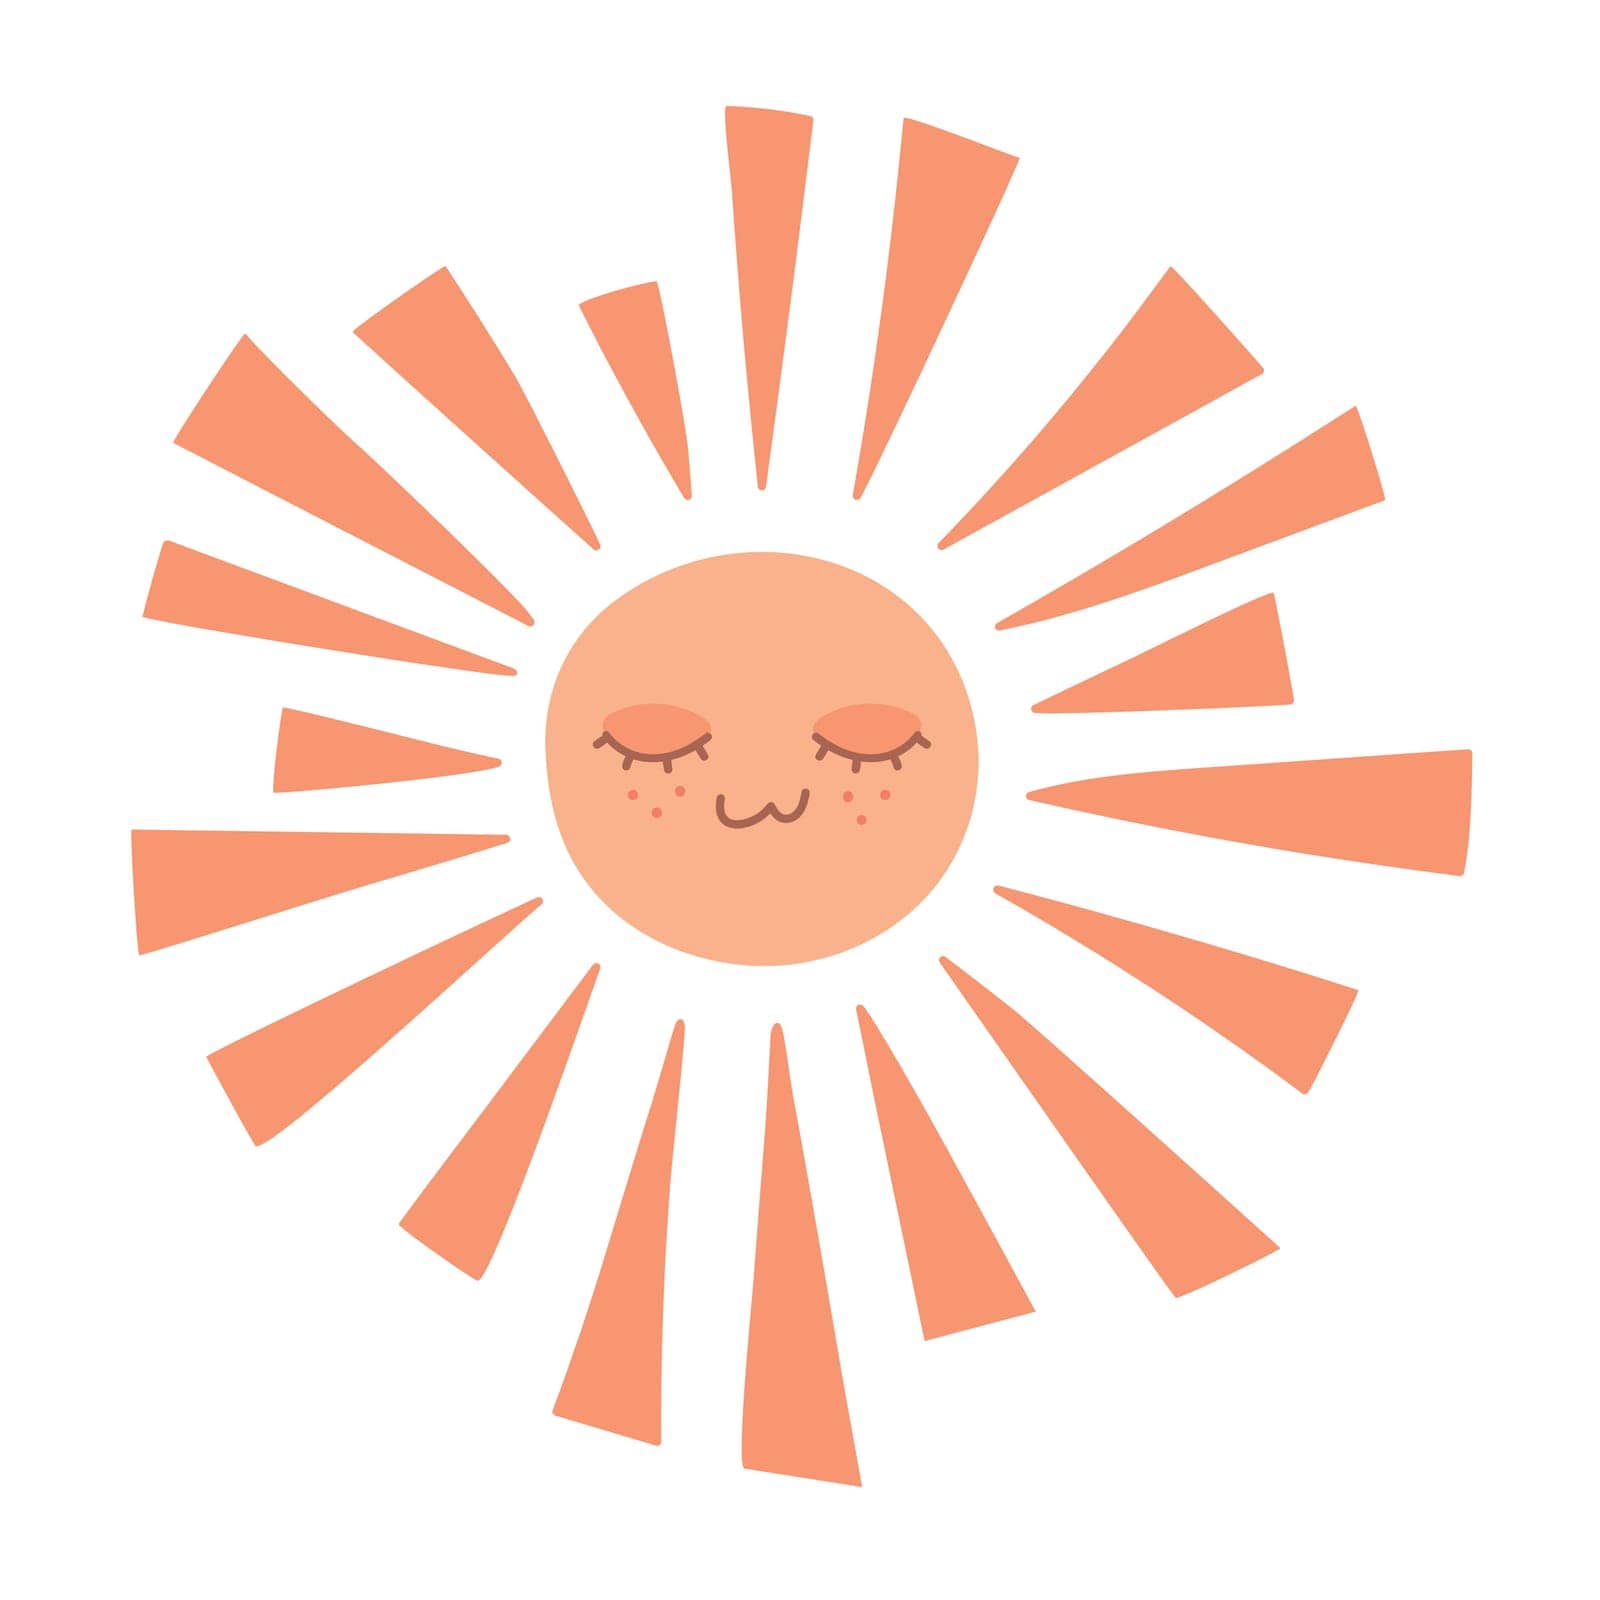 Cute hand drawn smiling sun character. Scandinavian style decoration for nursery kids room. Vector illustration 